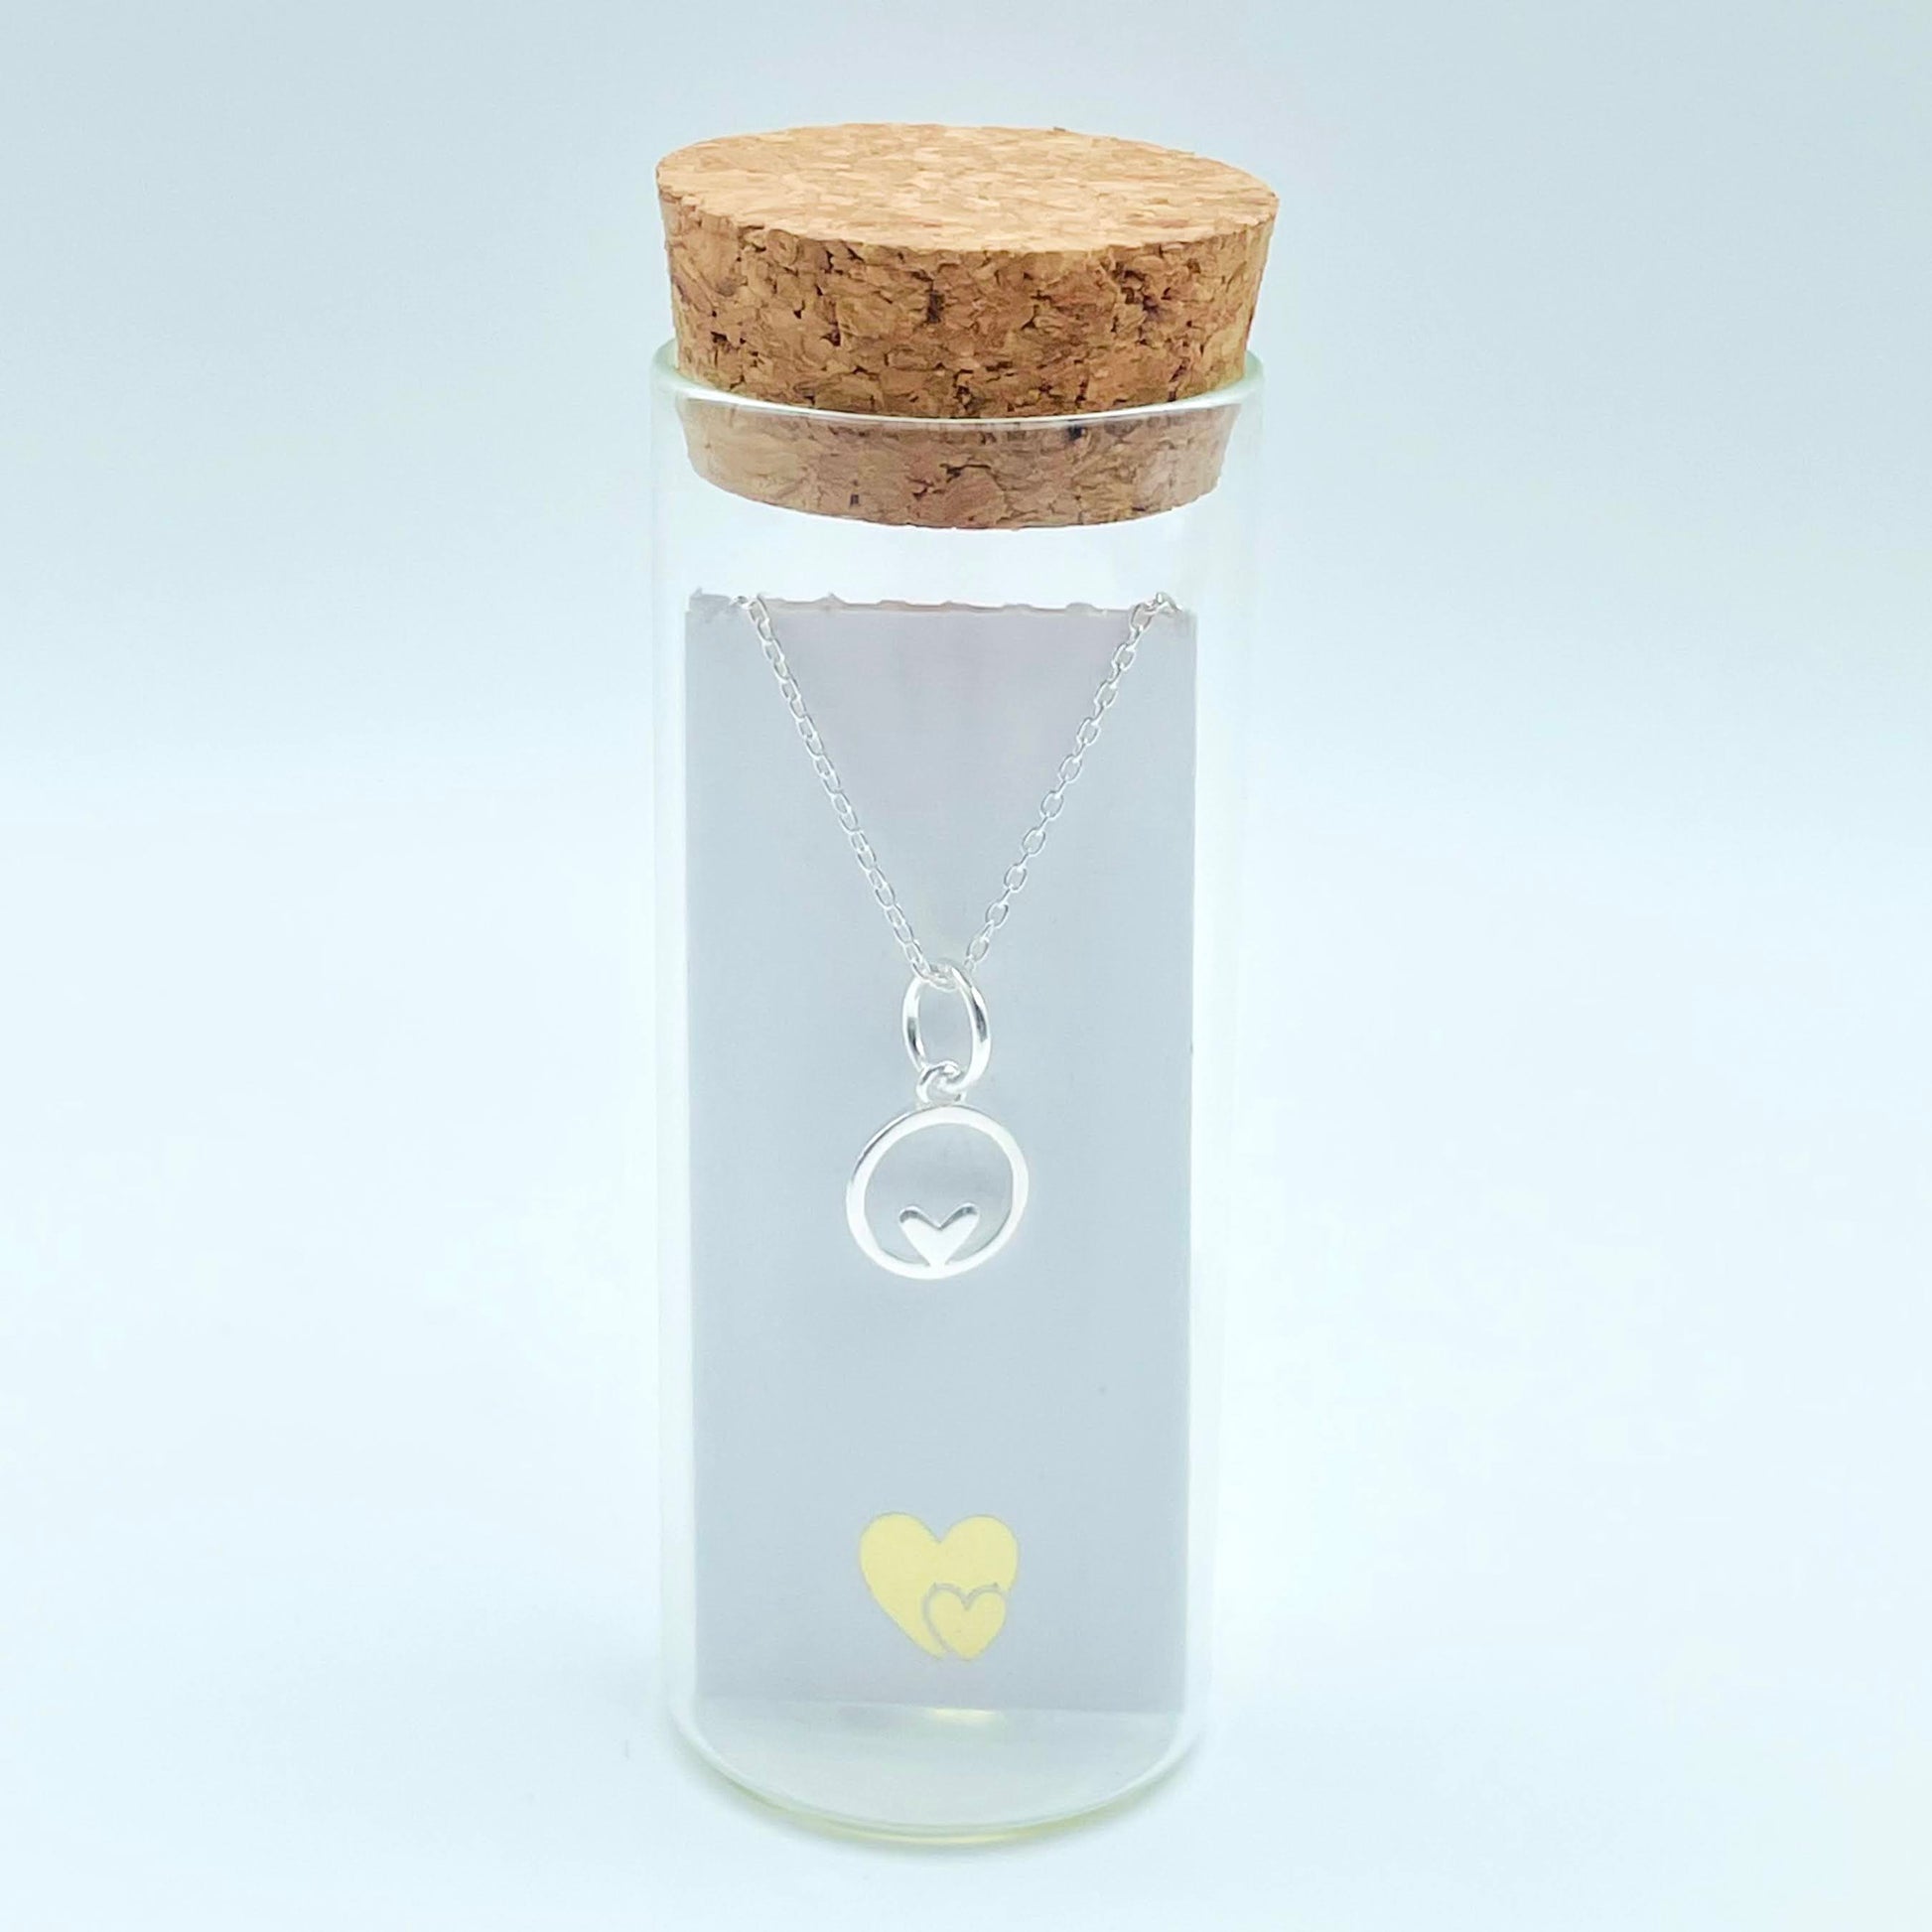 Sterling silver heart pendant suspended from a sterling silver chain and placed in a glass bottle topped with a cork lid. Behind the pendant is a small scroll for you to add your own message to your gift. 